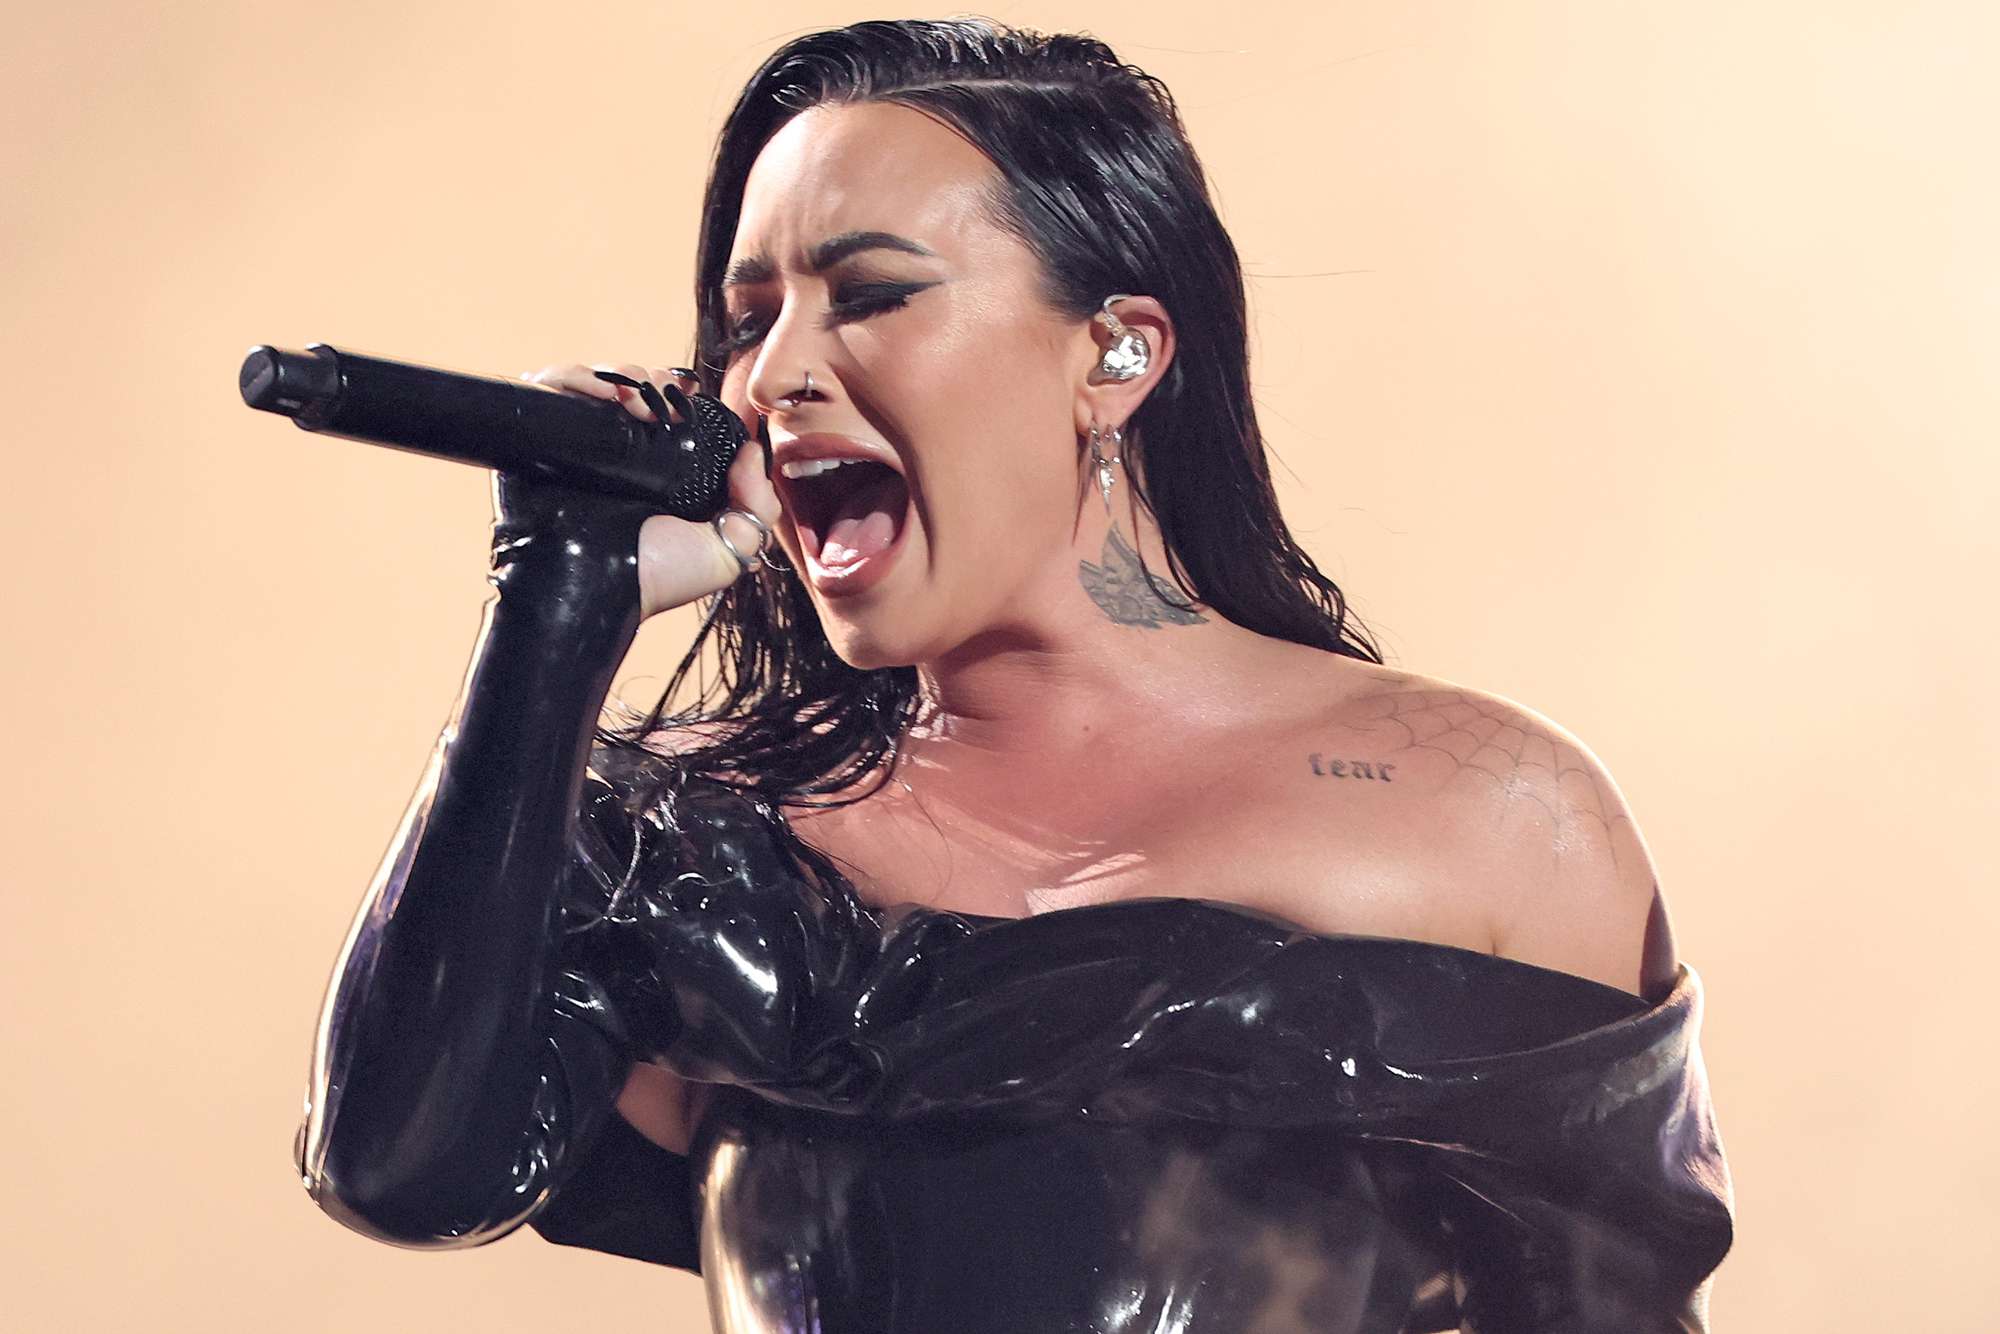 Demi Lovato at the 2023 MTV Video Music Awards held at Prudential Center on September 12, 2023